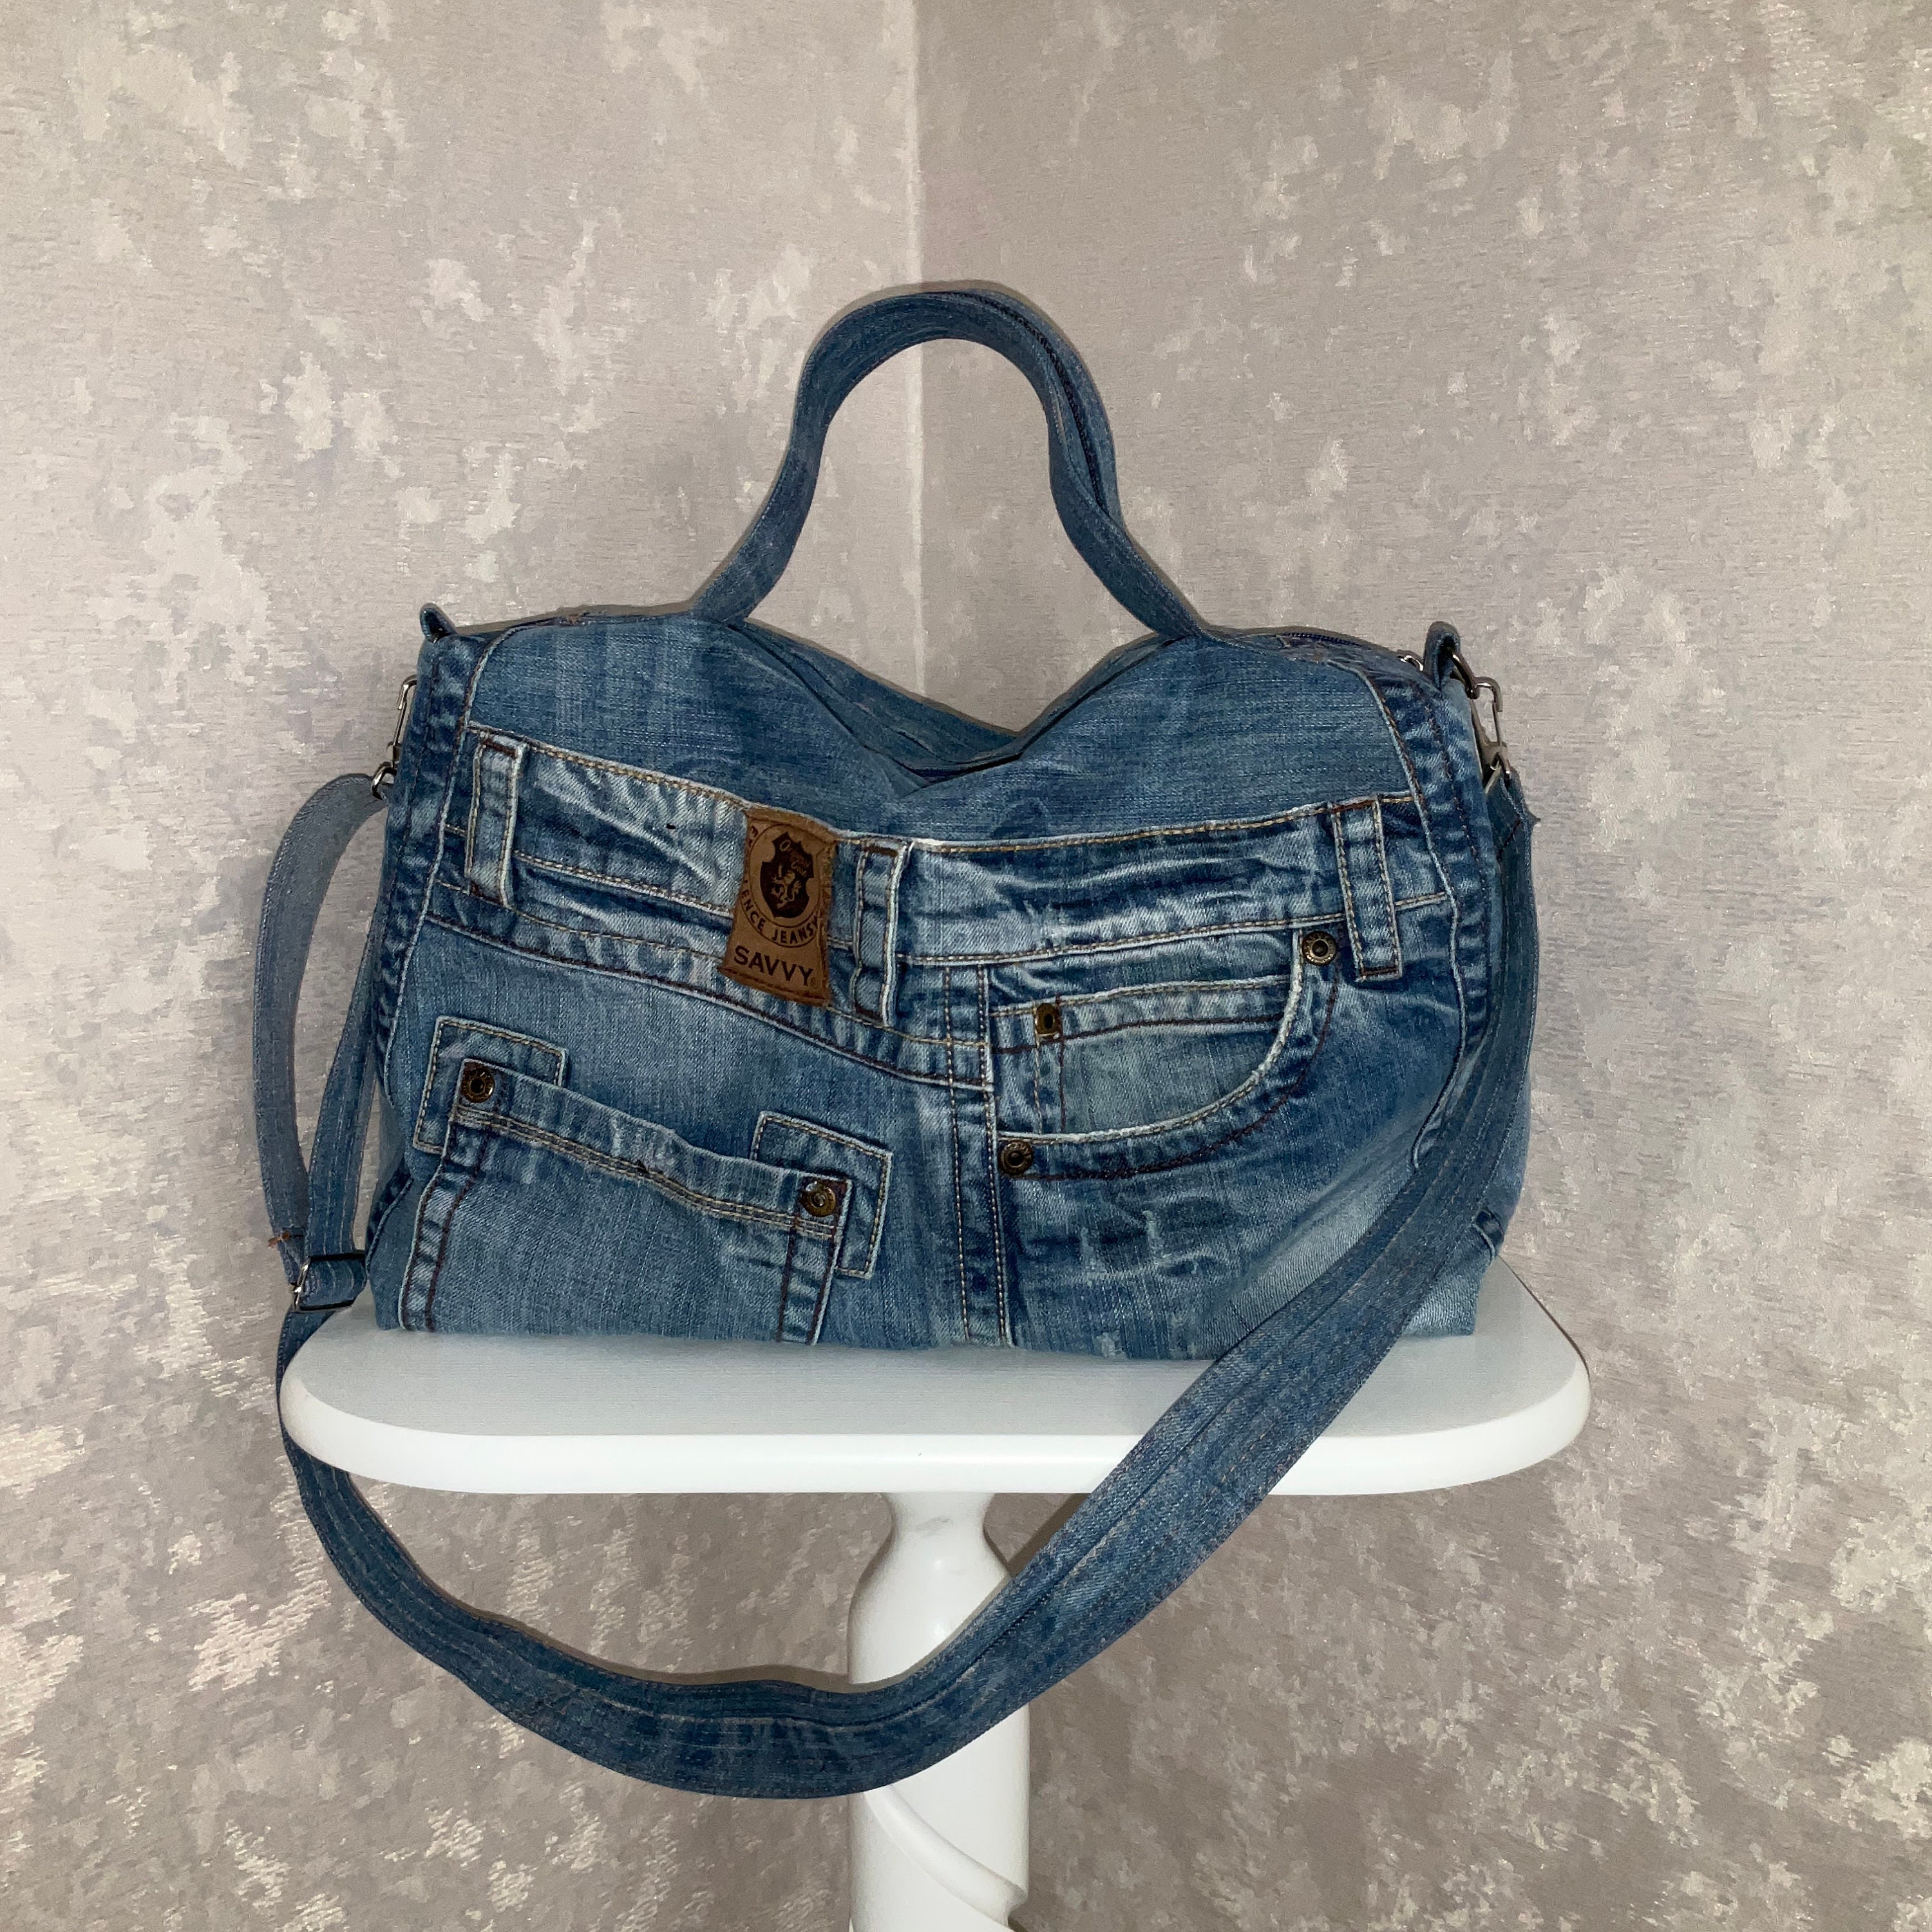 Aggregate more than 202 denim bags from old jeans super hot